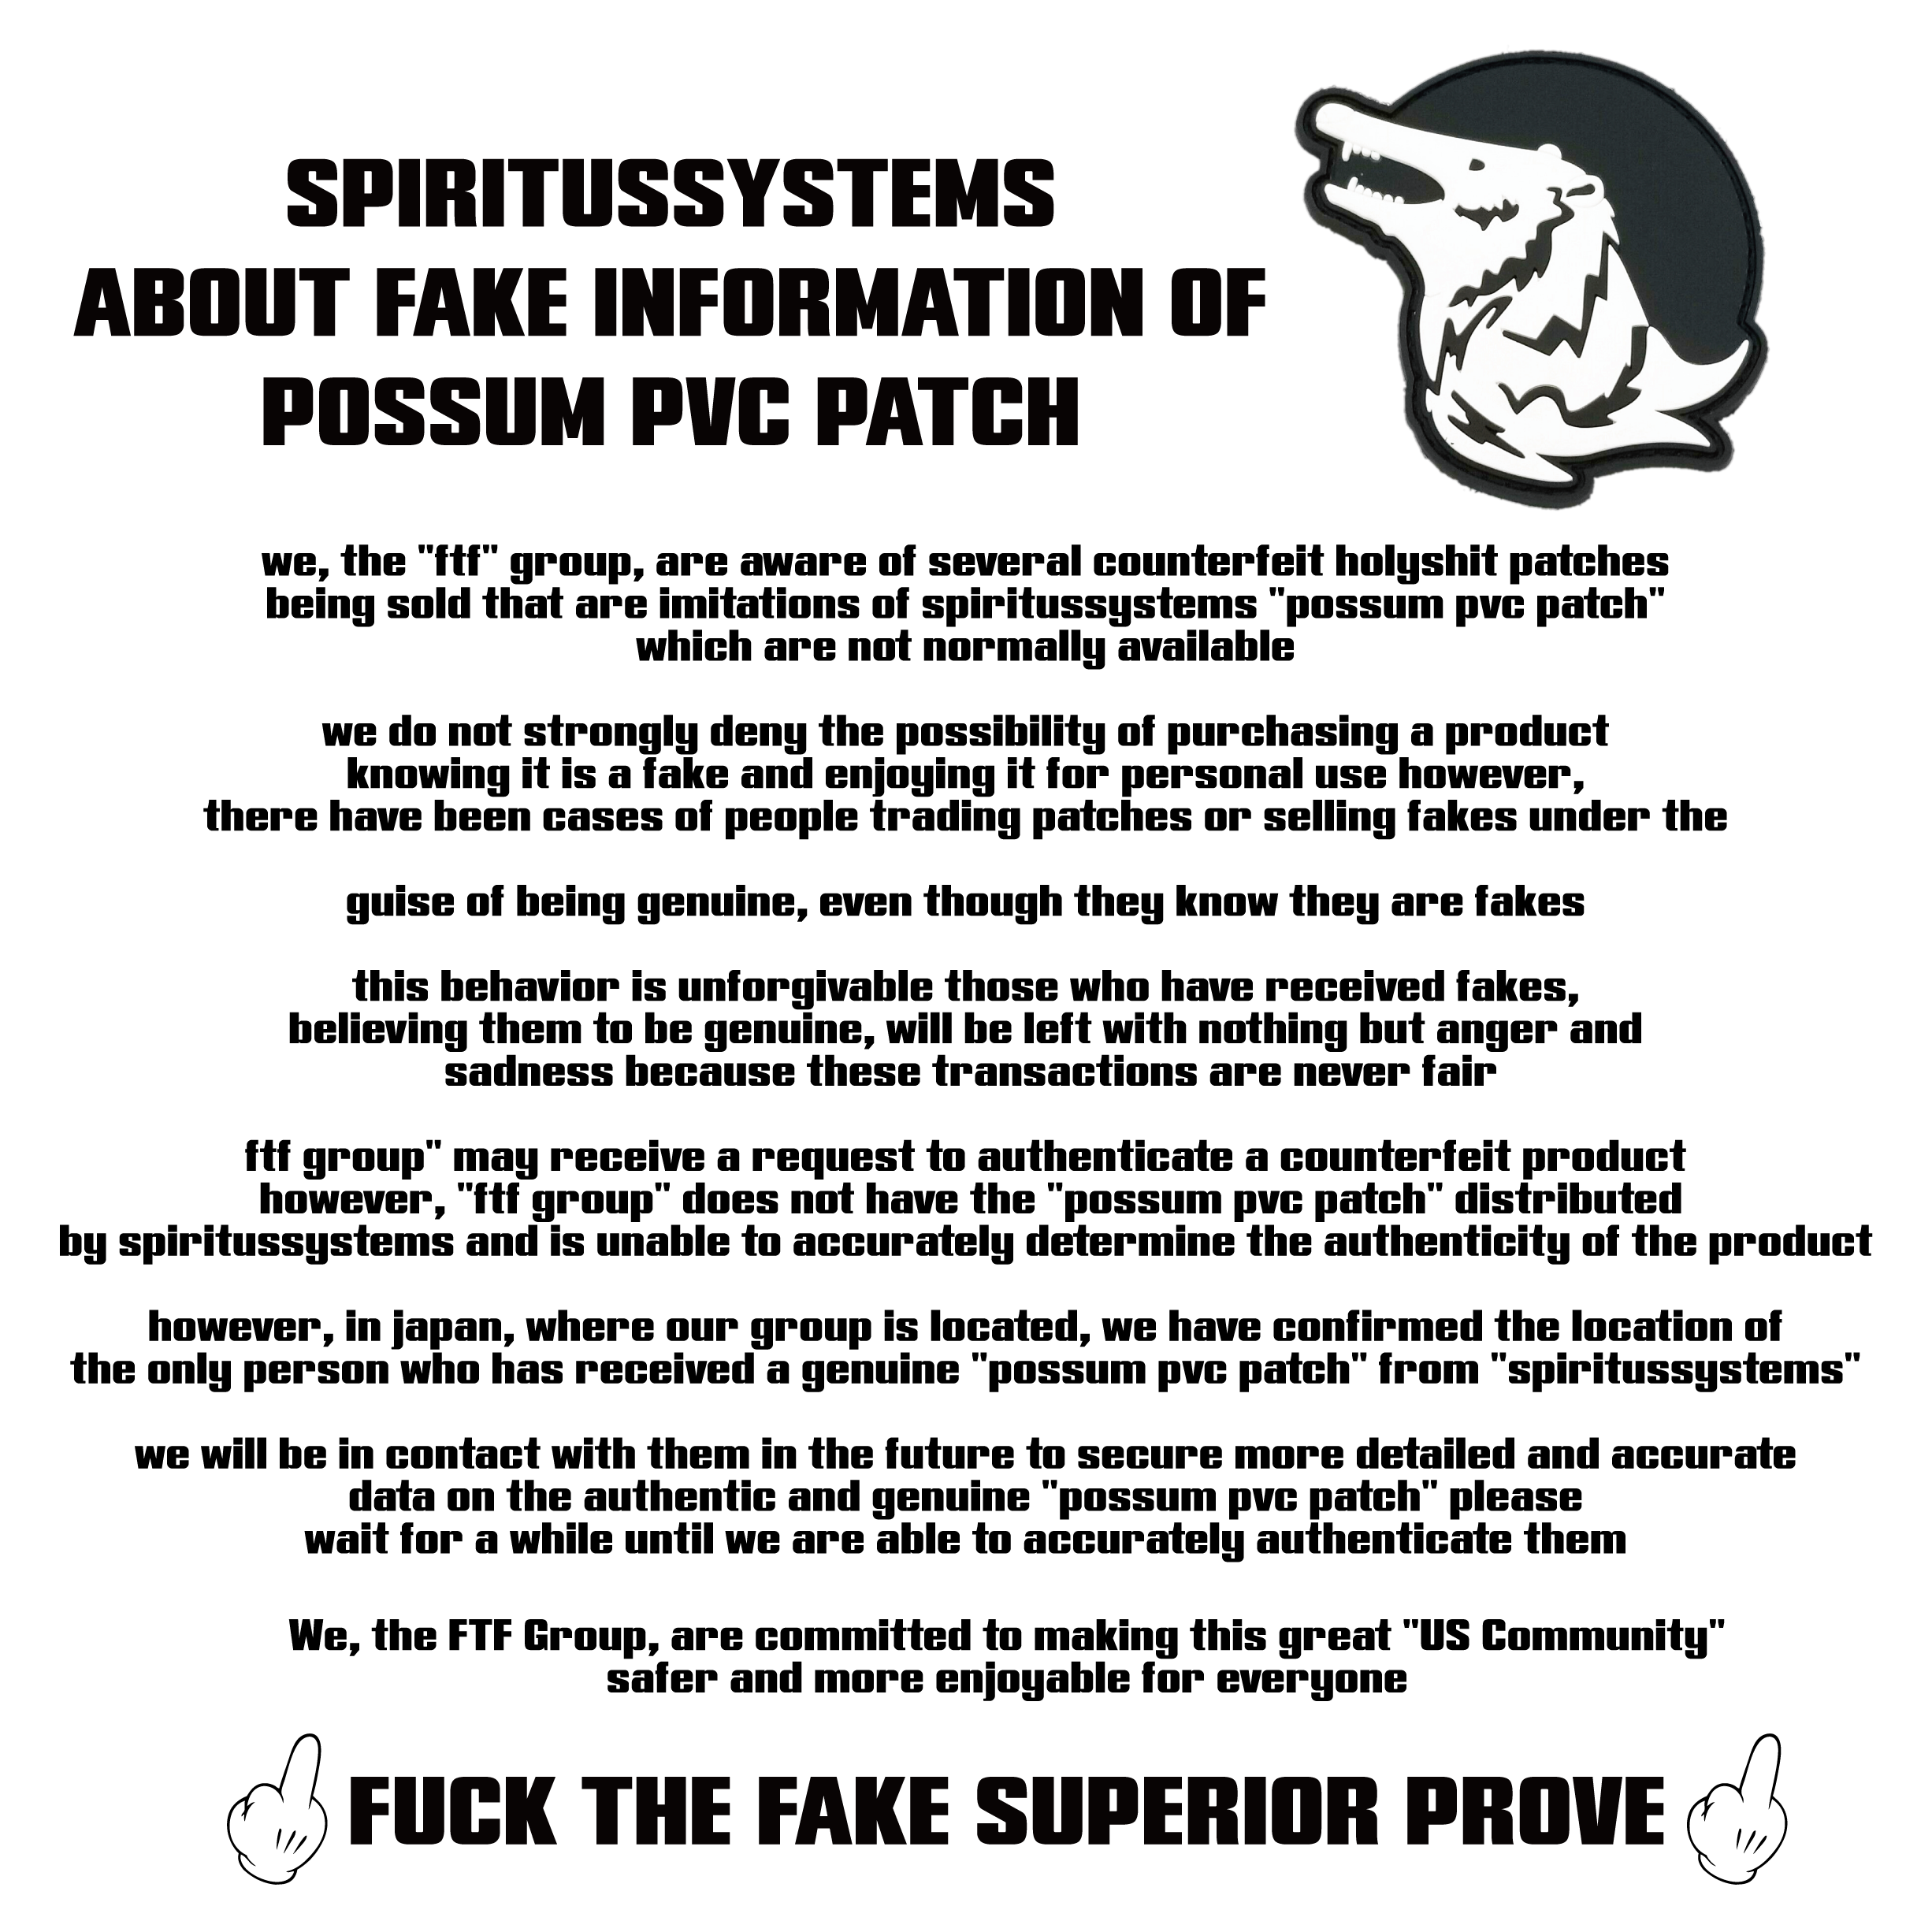 SPIRITUSSYSTEMS ABOUT FAKE INFORMATION OF POSSUM PVC PATCH REAL or FAKE FUCK THE FAKE